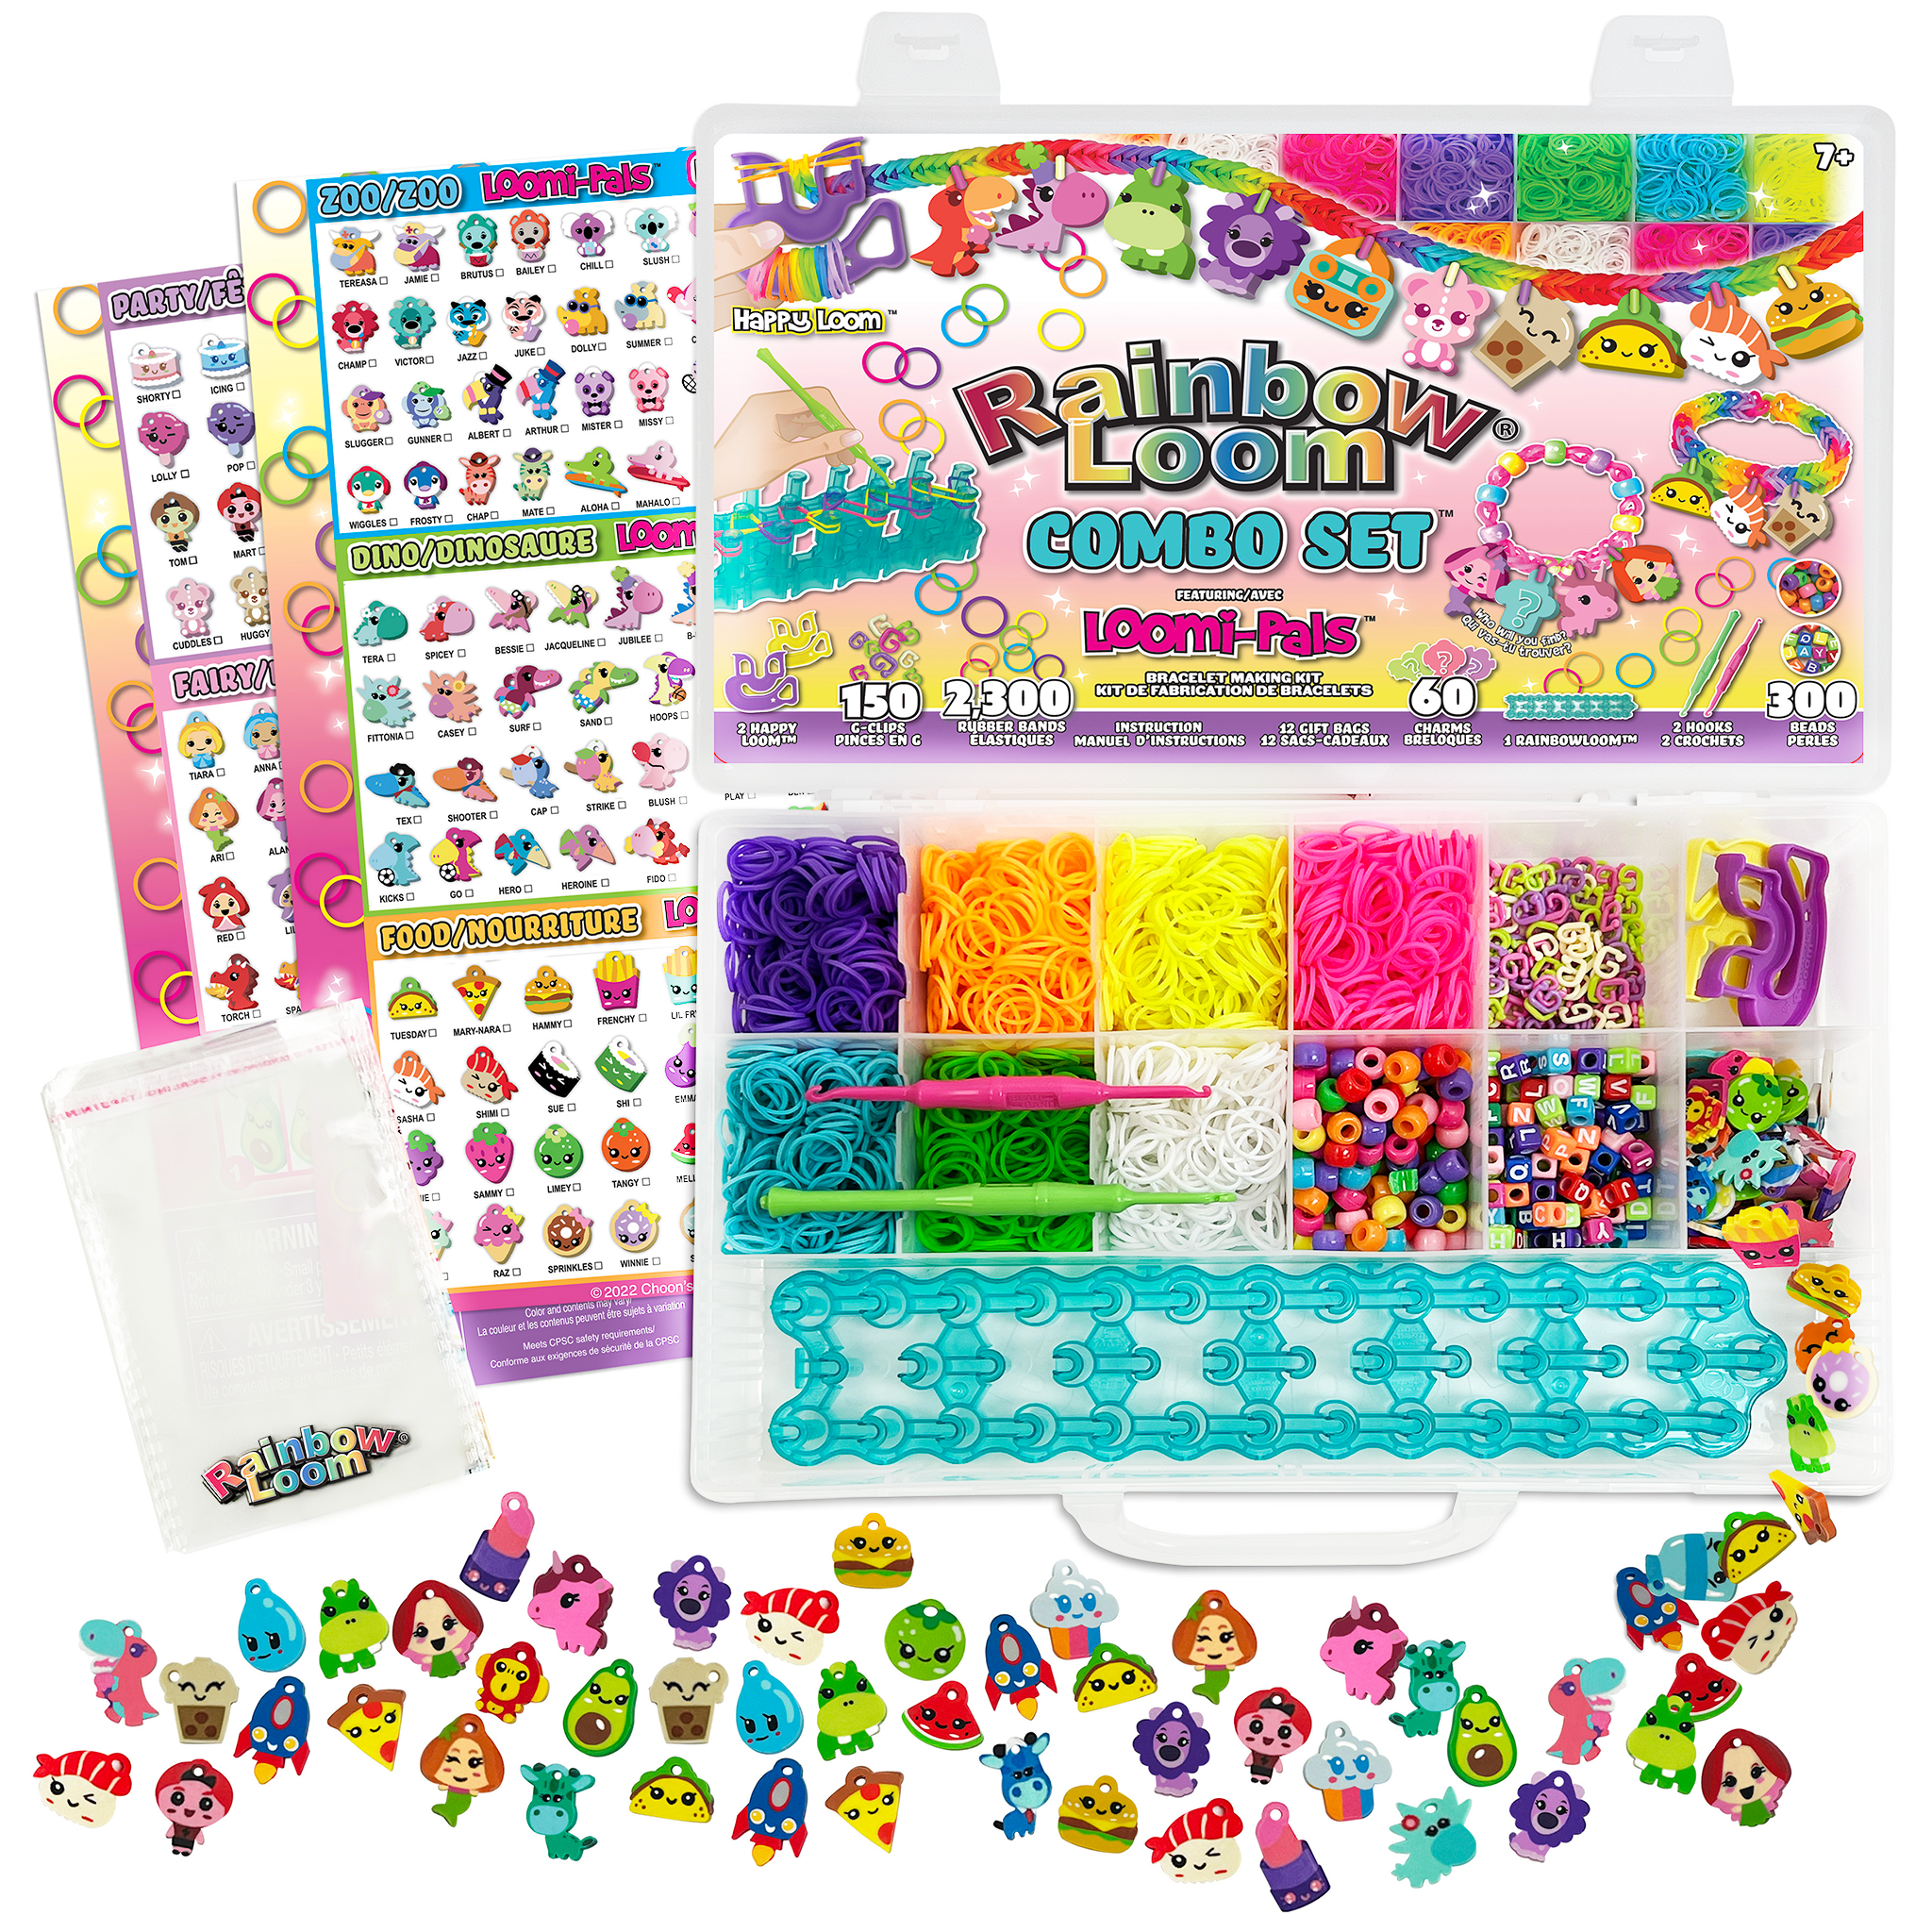 Rainbow Loom Loomi-Pals Combo Bracelet Kit with Charms - Creative Play for  Kids 7+ Years - Includes 2,300 Rubber Bands, 60 Charms, Beads, Clips, and  More! in the Kids Play Toys department at